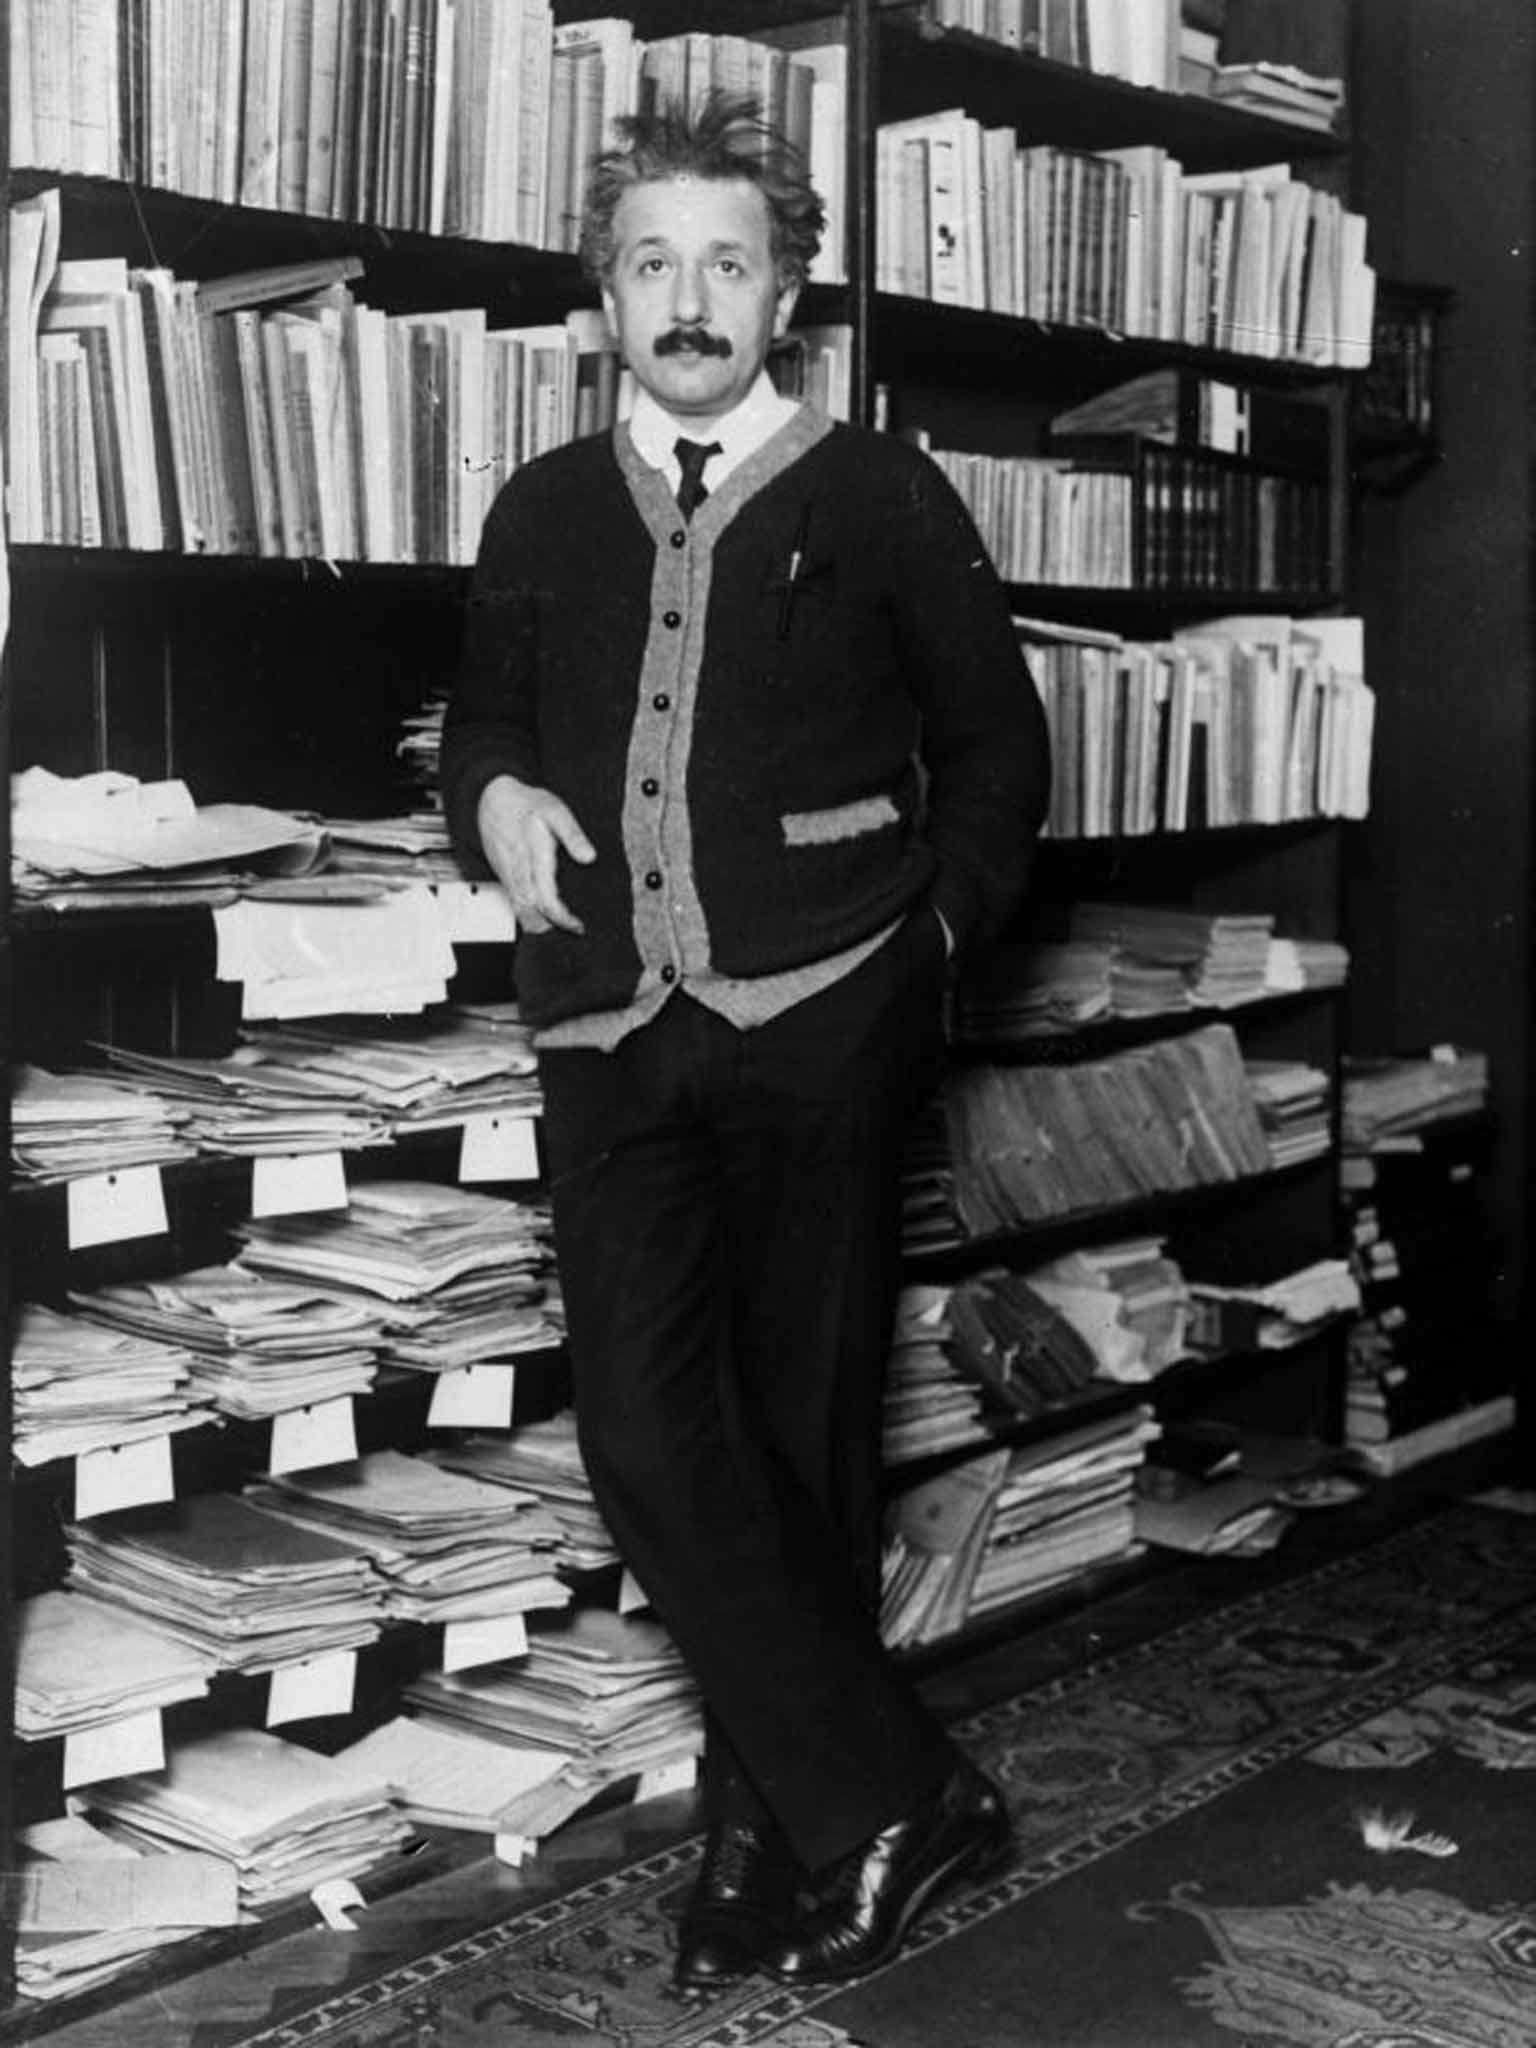 Professor Albert Einstein. A number of stories in the collection were inspired by his theories about black holes